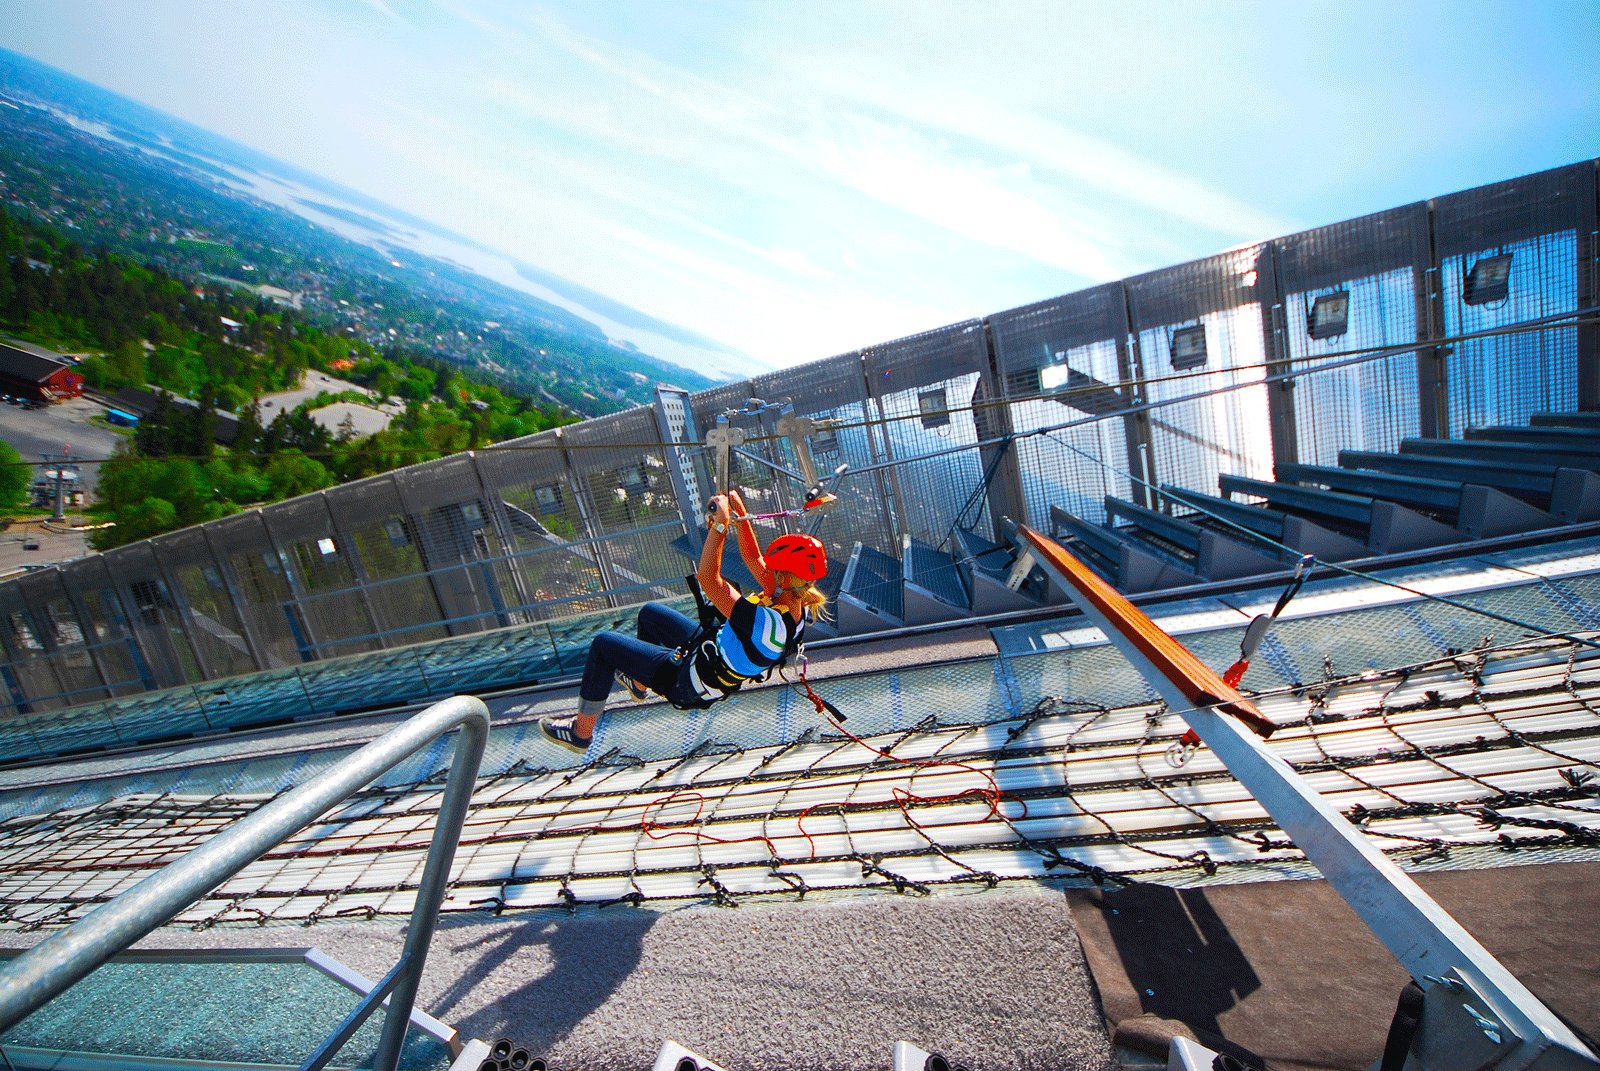 How to zip Line from the ski jumping hill in Oslo